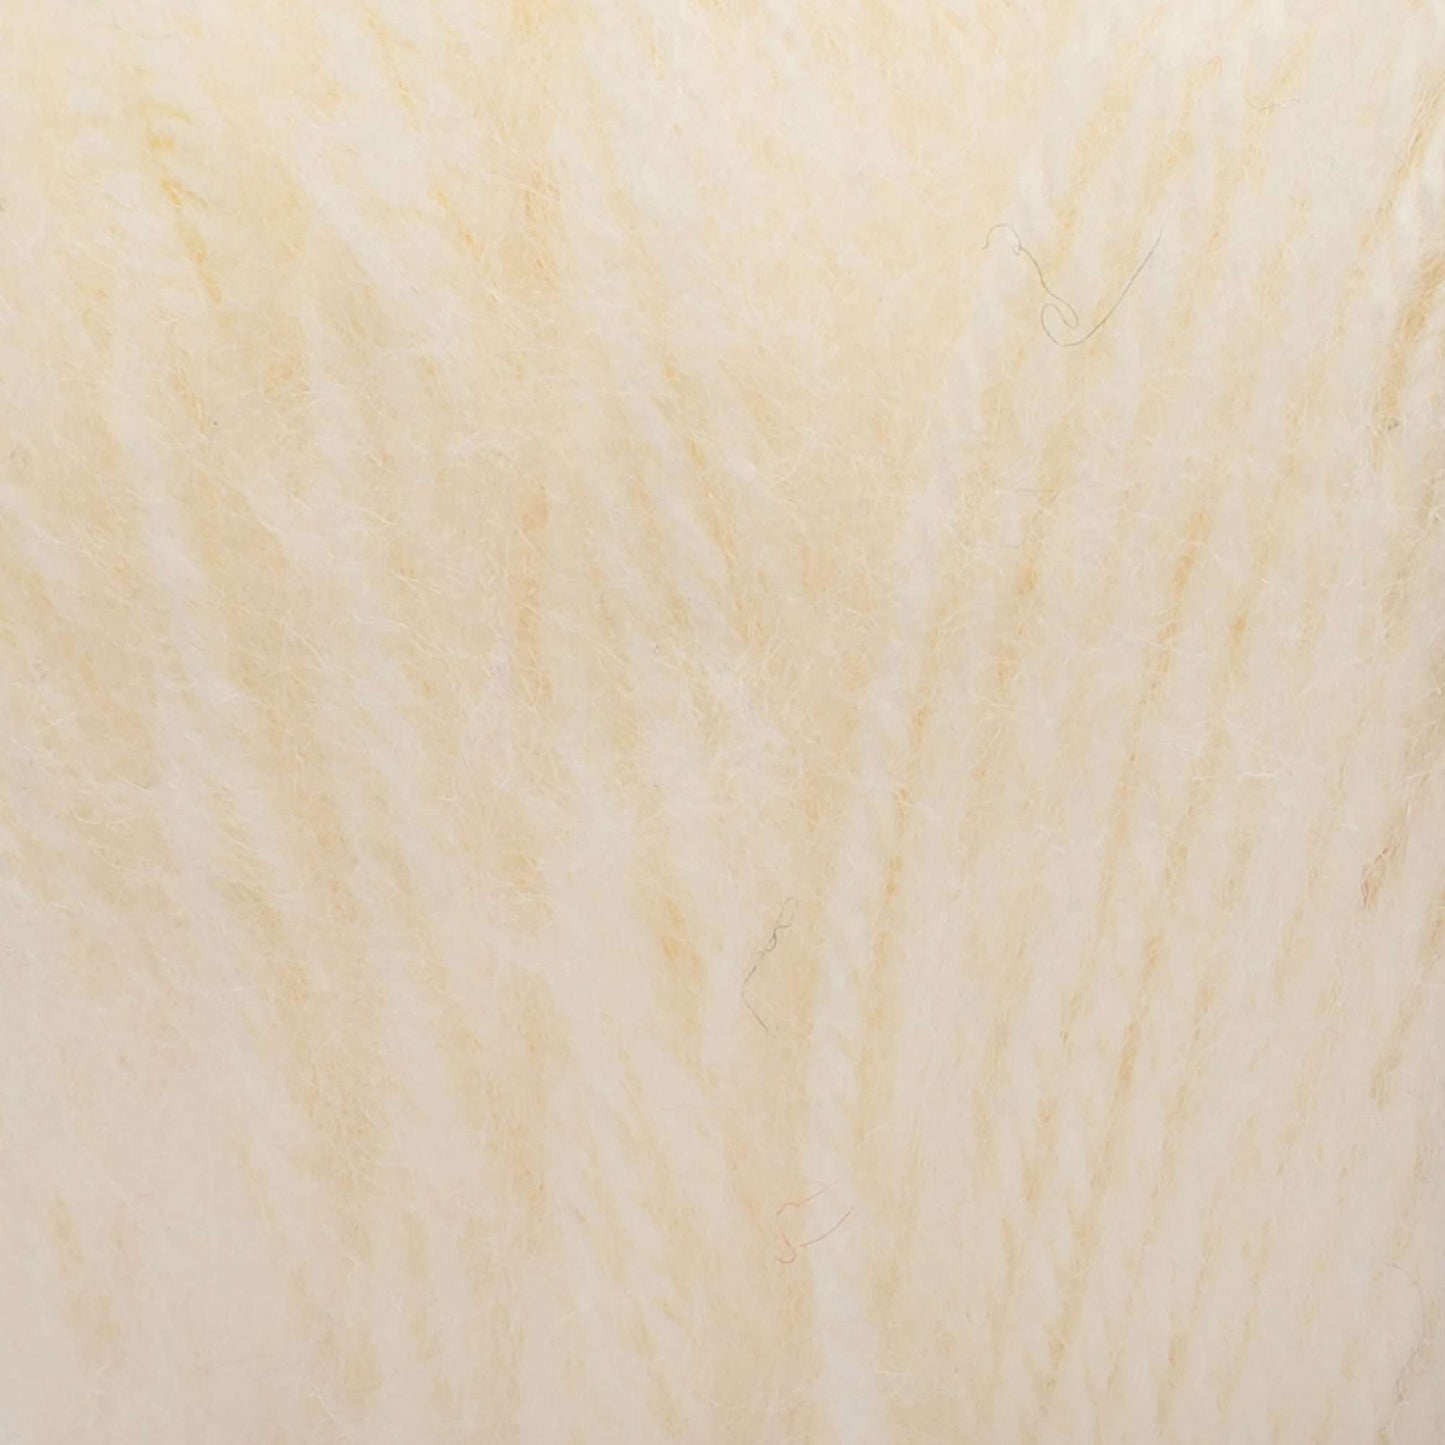 Red Heart® Super Saver - Brushed - Cream (detail)